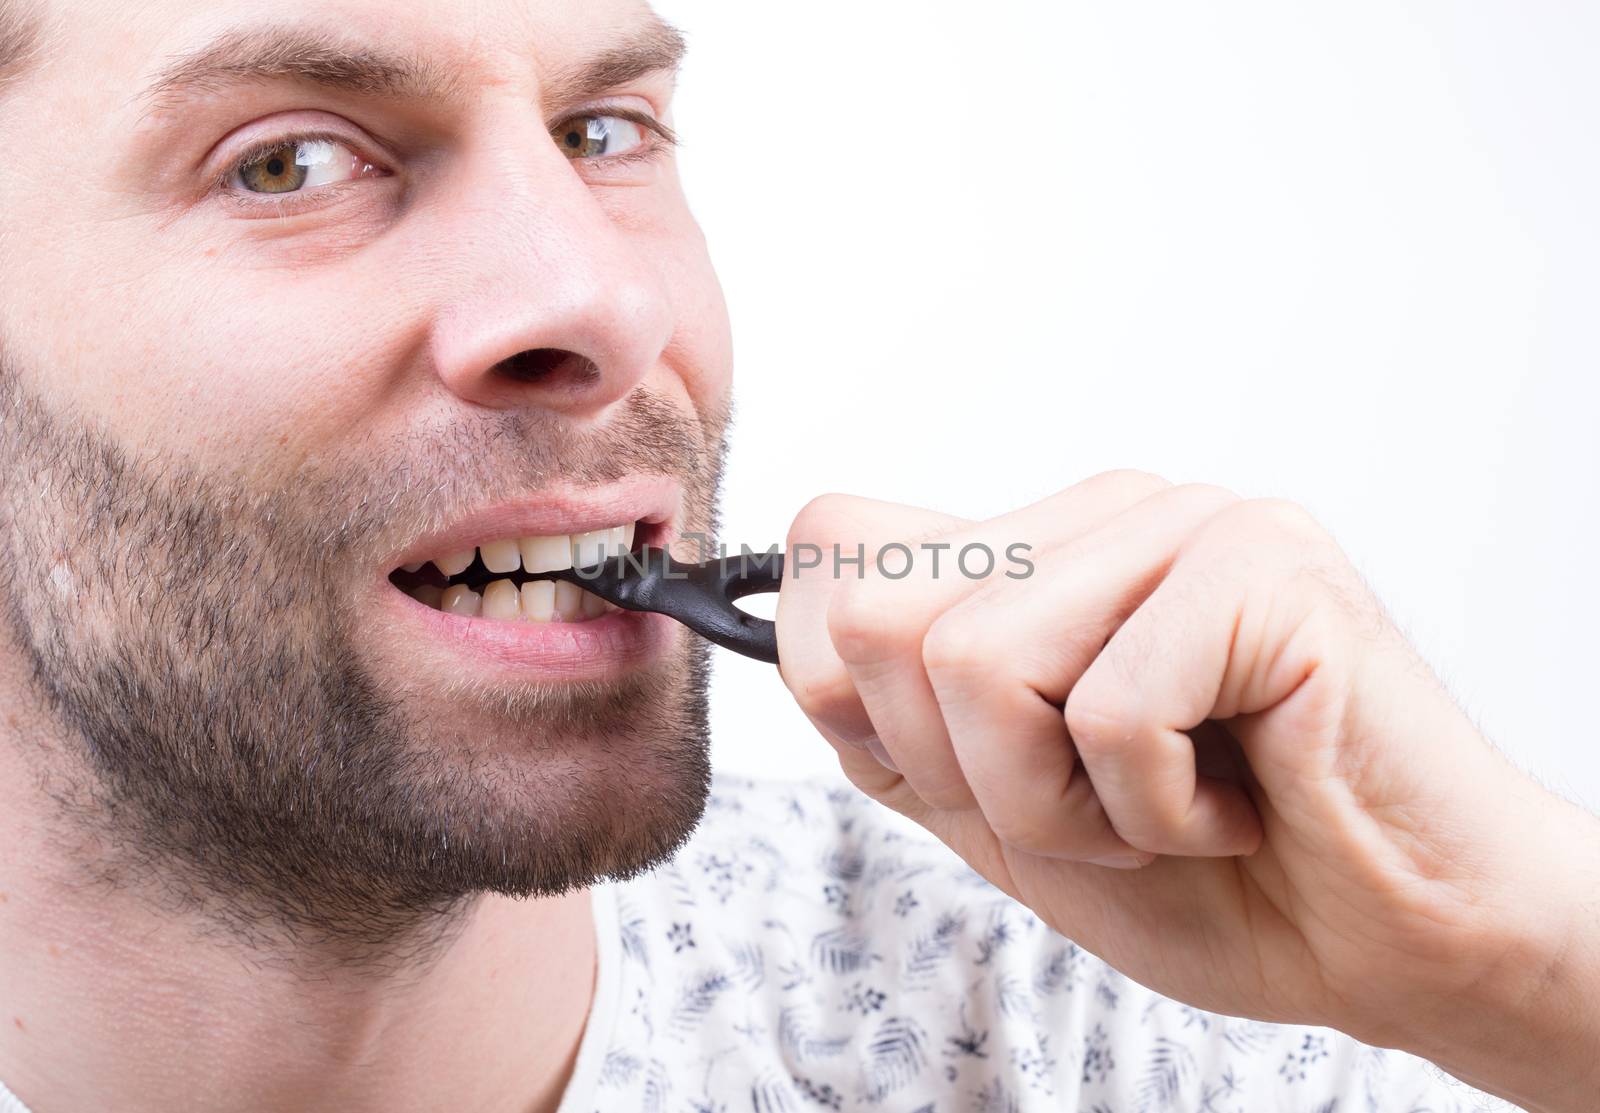 Man eating typicaly dutch candy called 'Dropsleutel' (candy key) by michaklootwijk